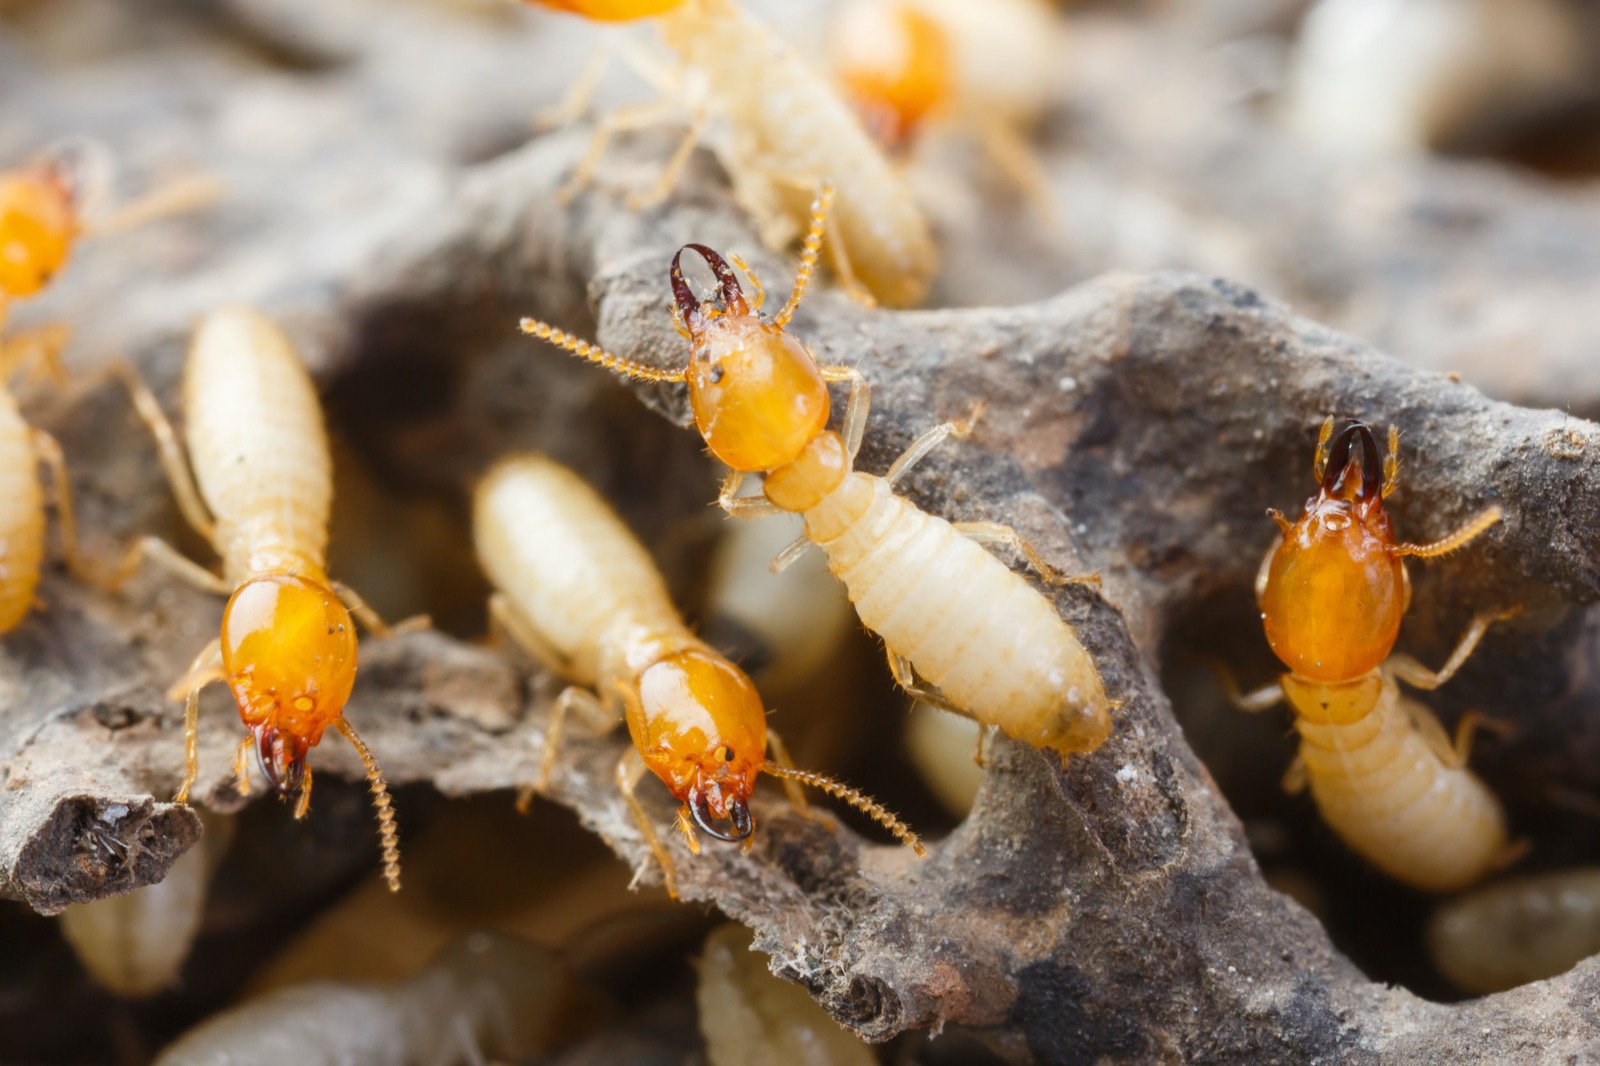 The Average Person Can Score 10 on This Trivia Quiz, So to Impress Me, You'll Have to Score 15 Termites or white ants